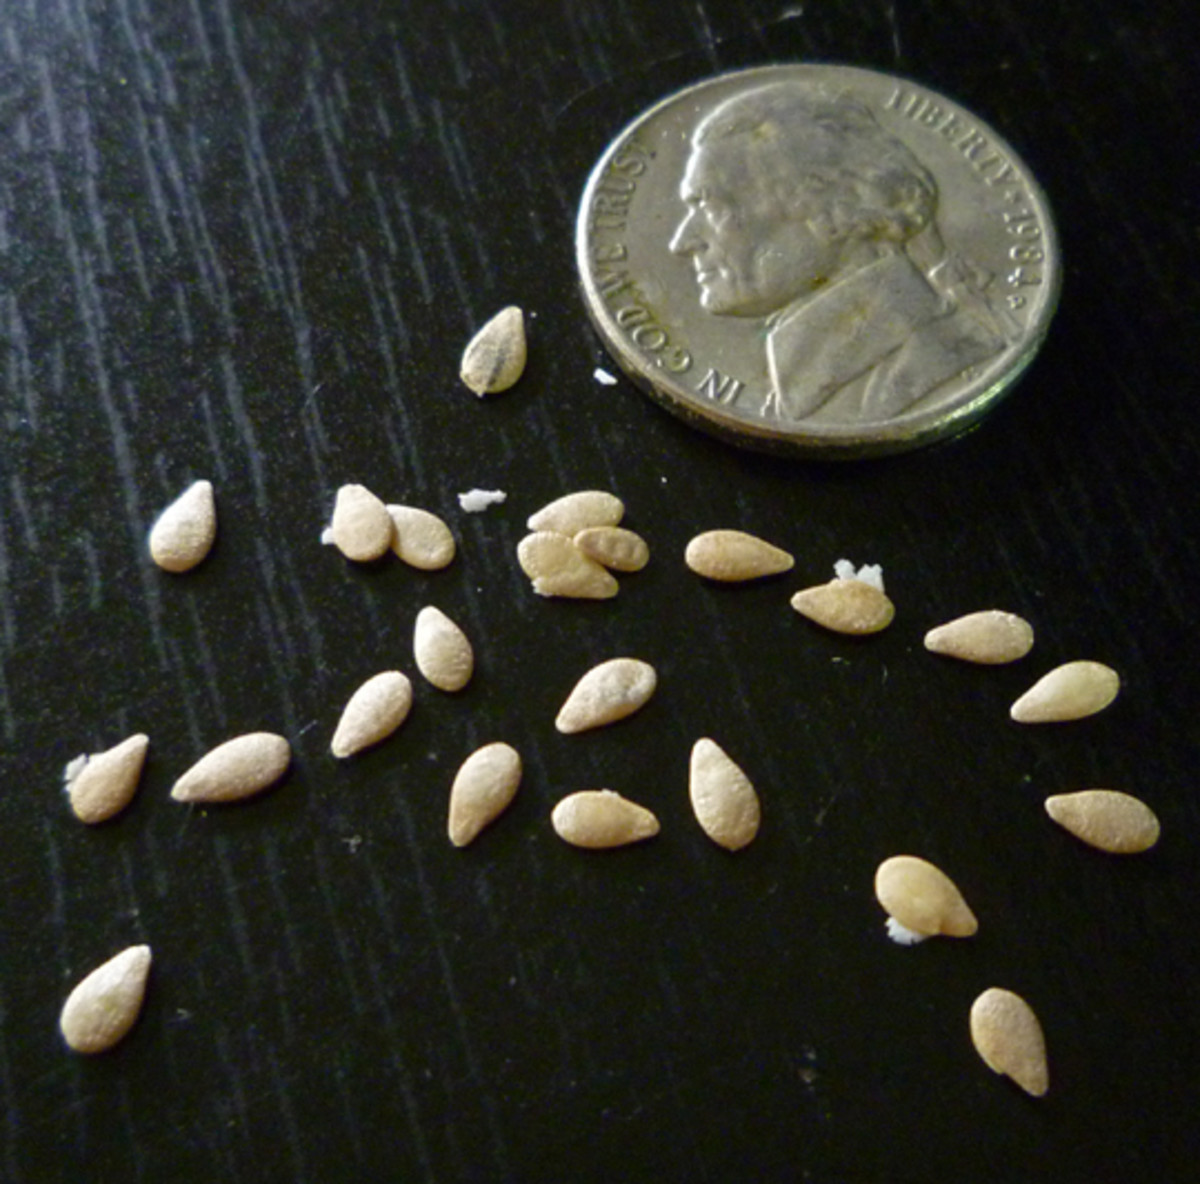 Mouse melon seeds. Small fruits means small seeds!